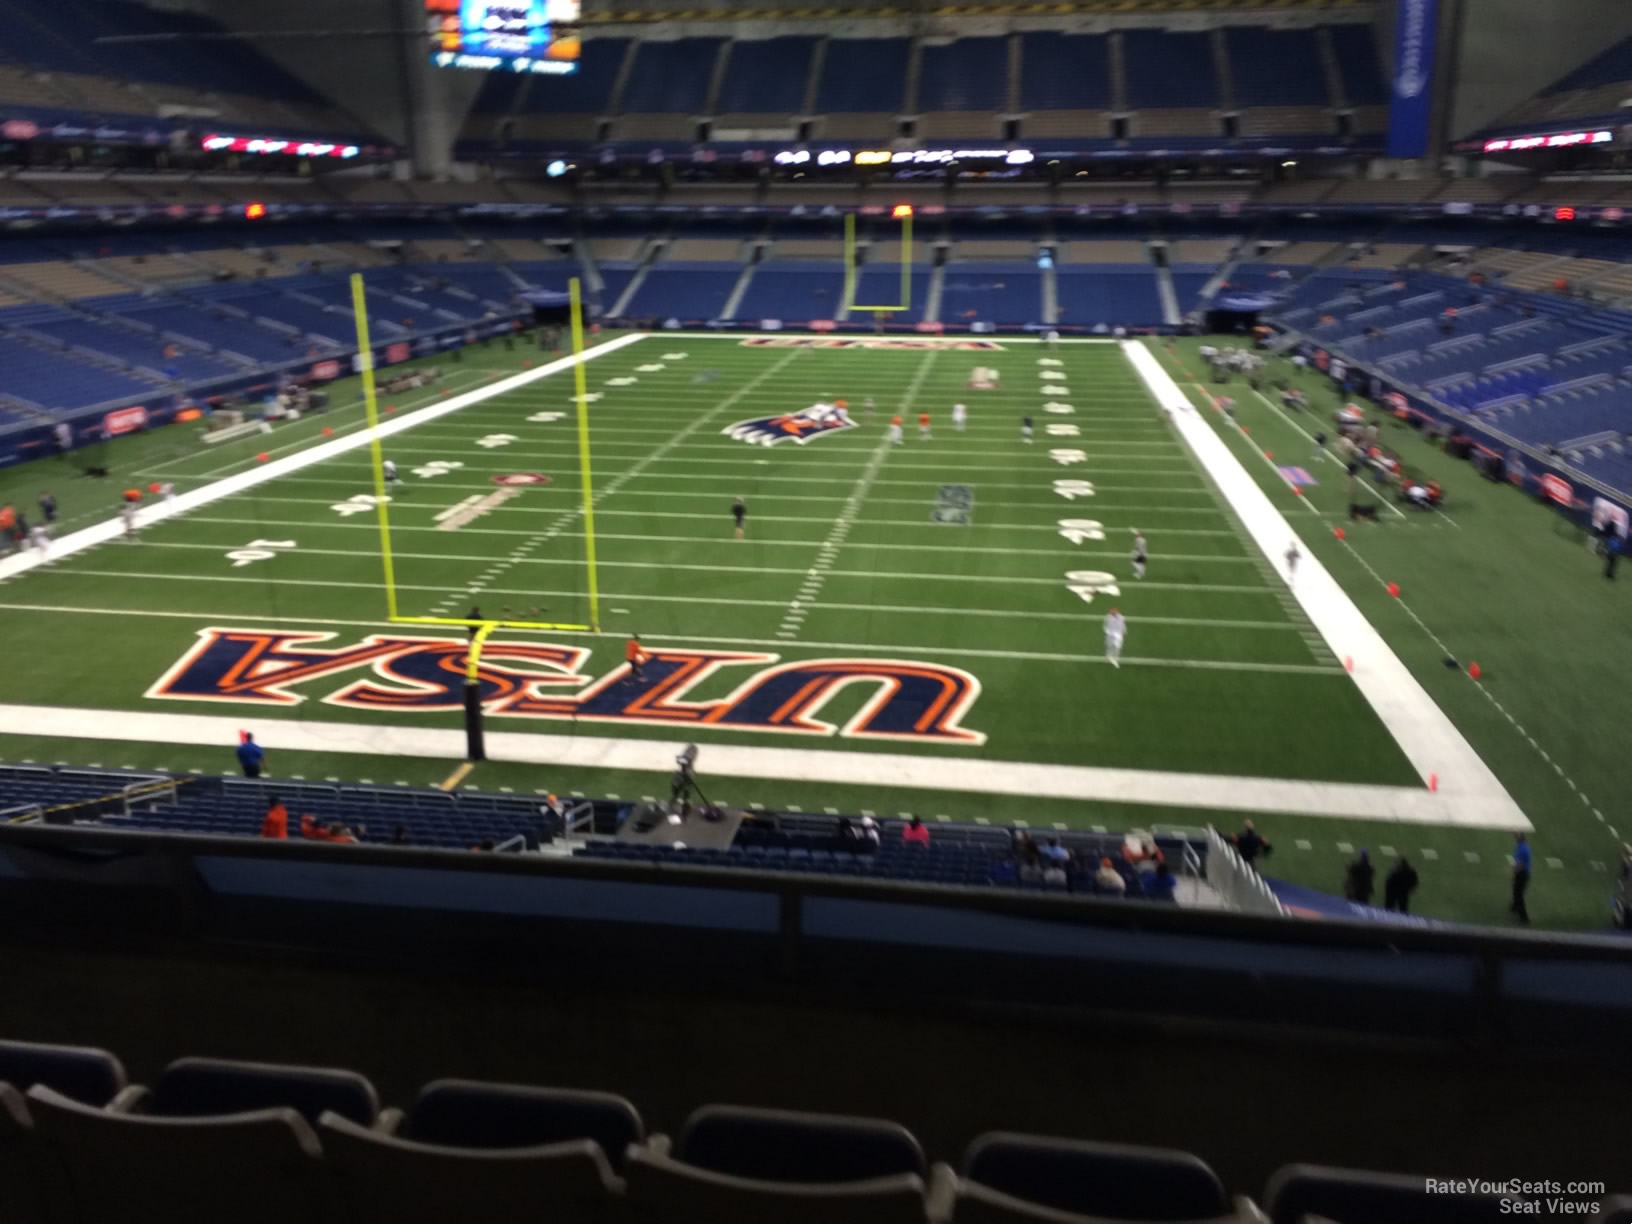 section 222, row 5 seat view  for football - alamodome